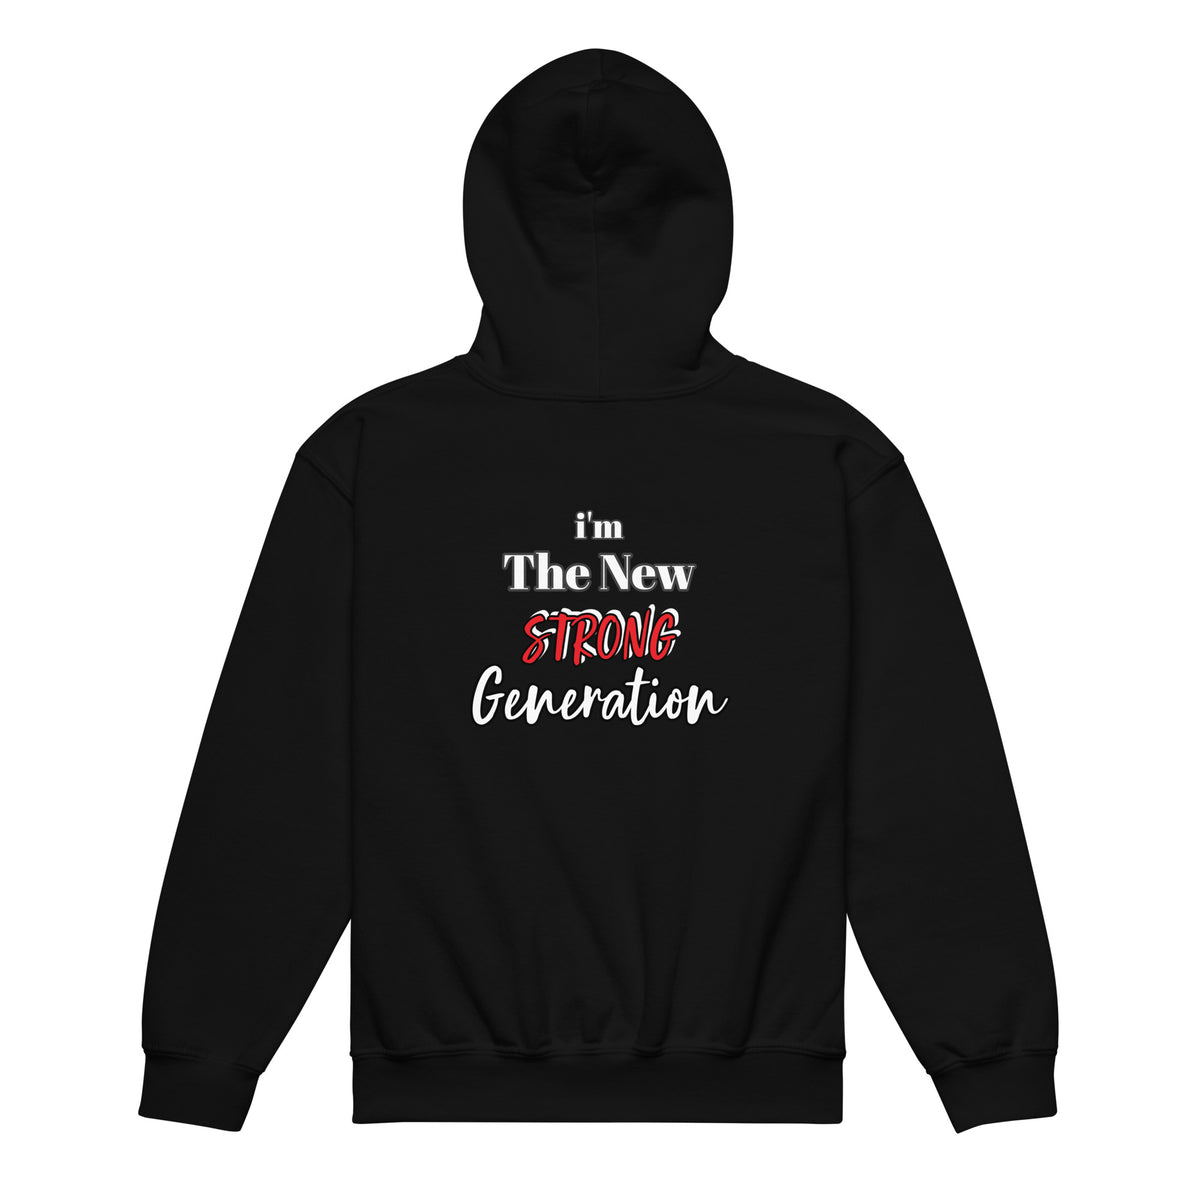 Hoodie para Niño - " I´m the new strong generation"